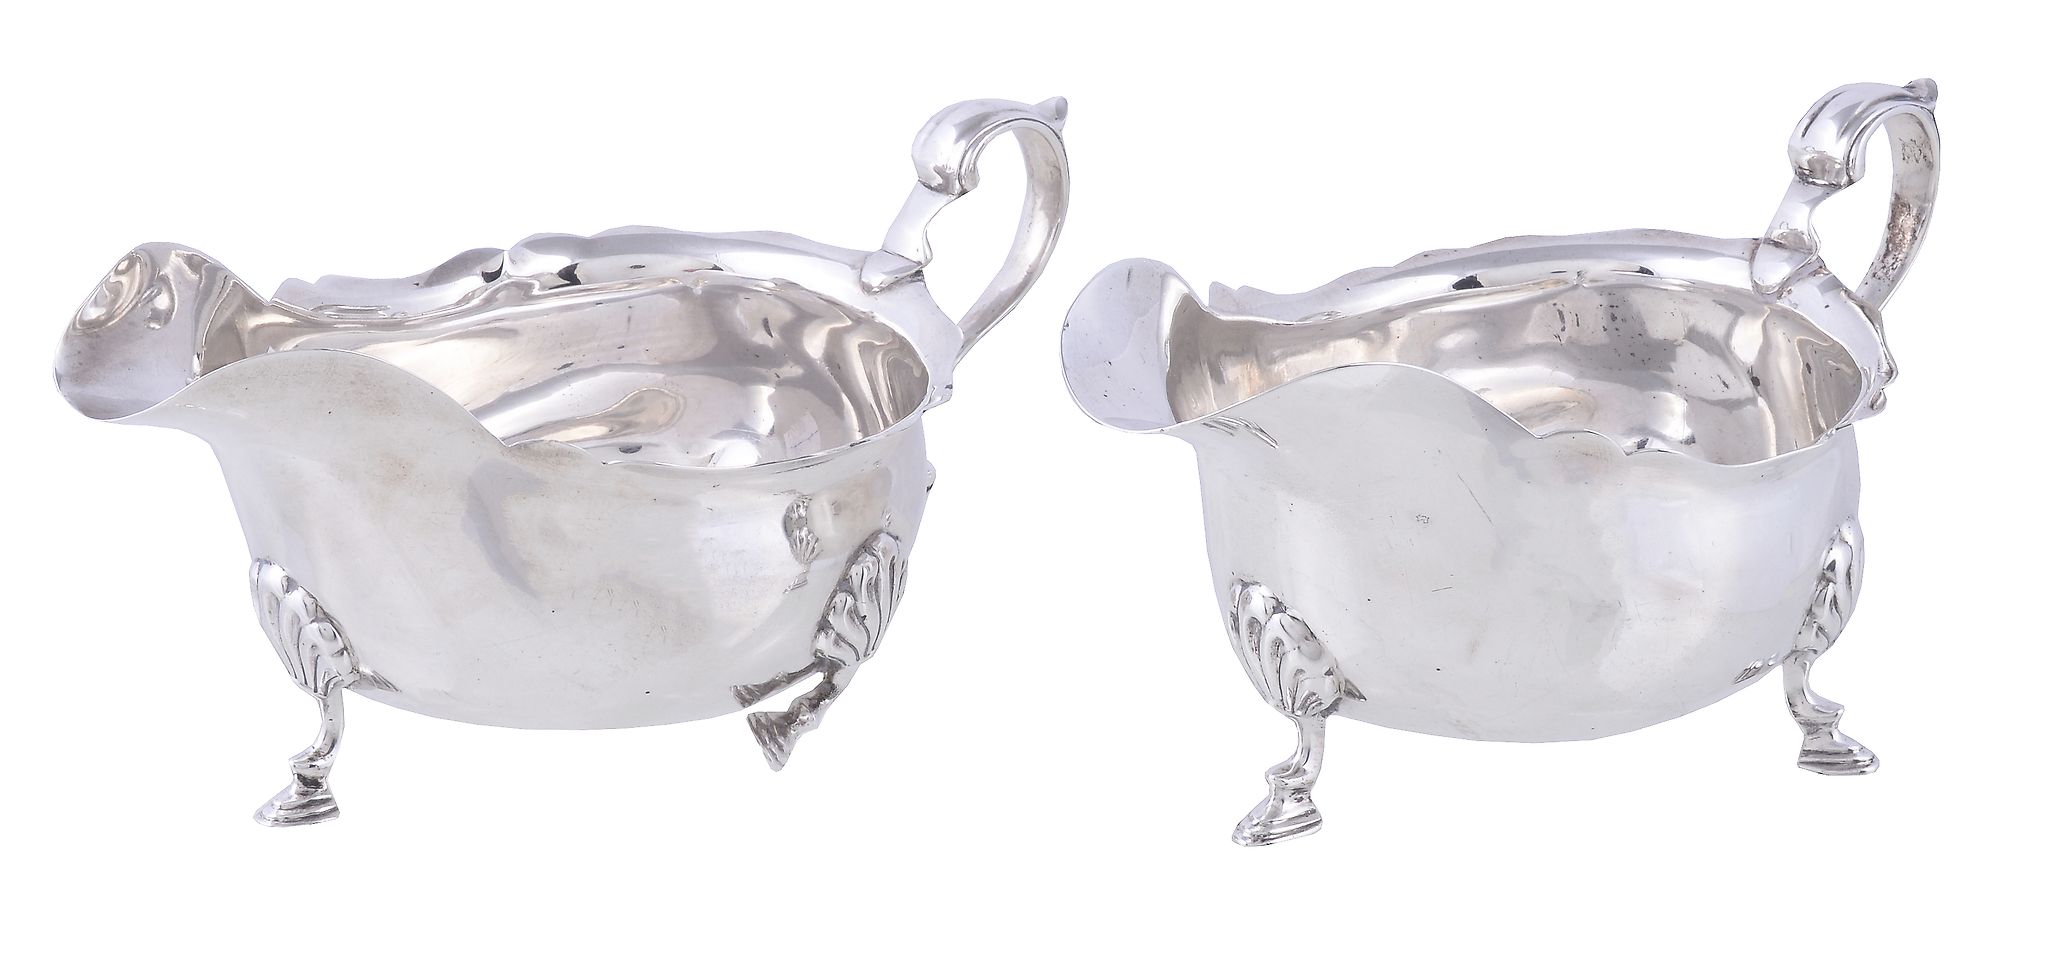 A matched pair of silver oval sauce boats by Elkington & Co., Birmingham 1919 and 1920, with